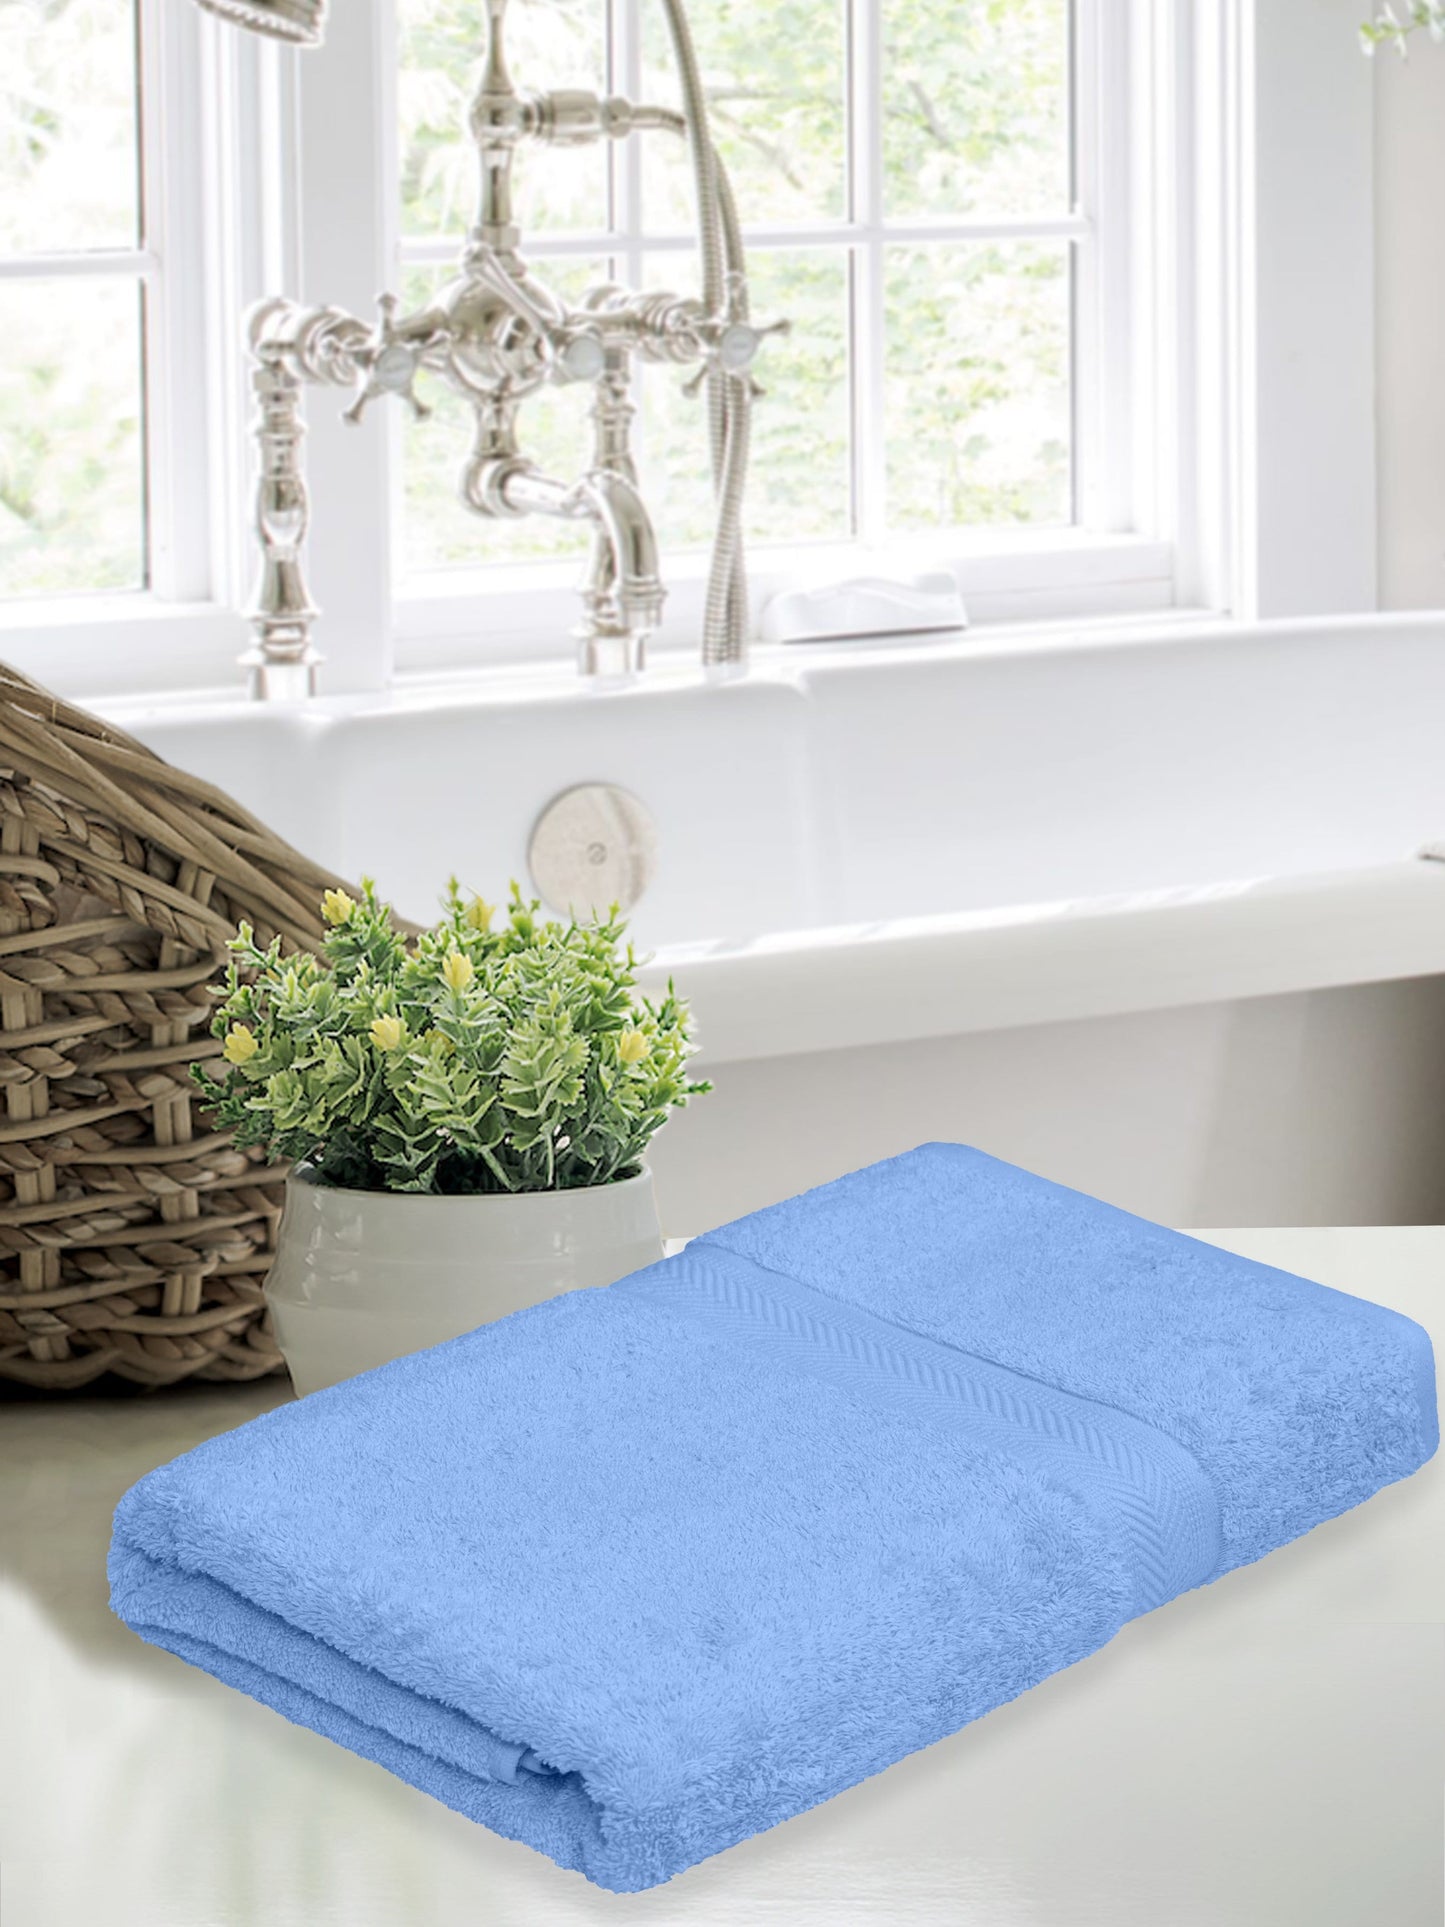 Towel Set of 6, 100% Cotton, Skyblue & Navy